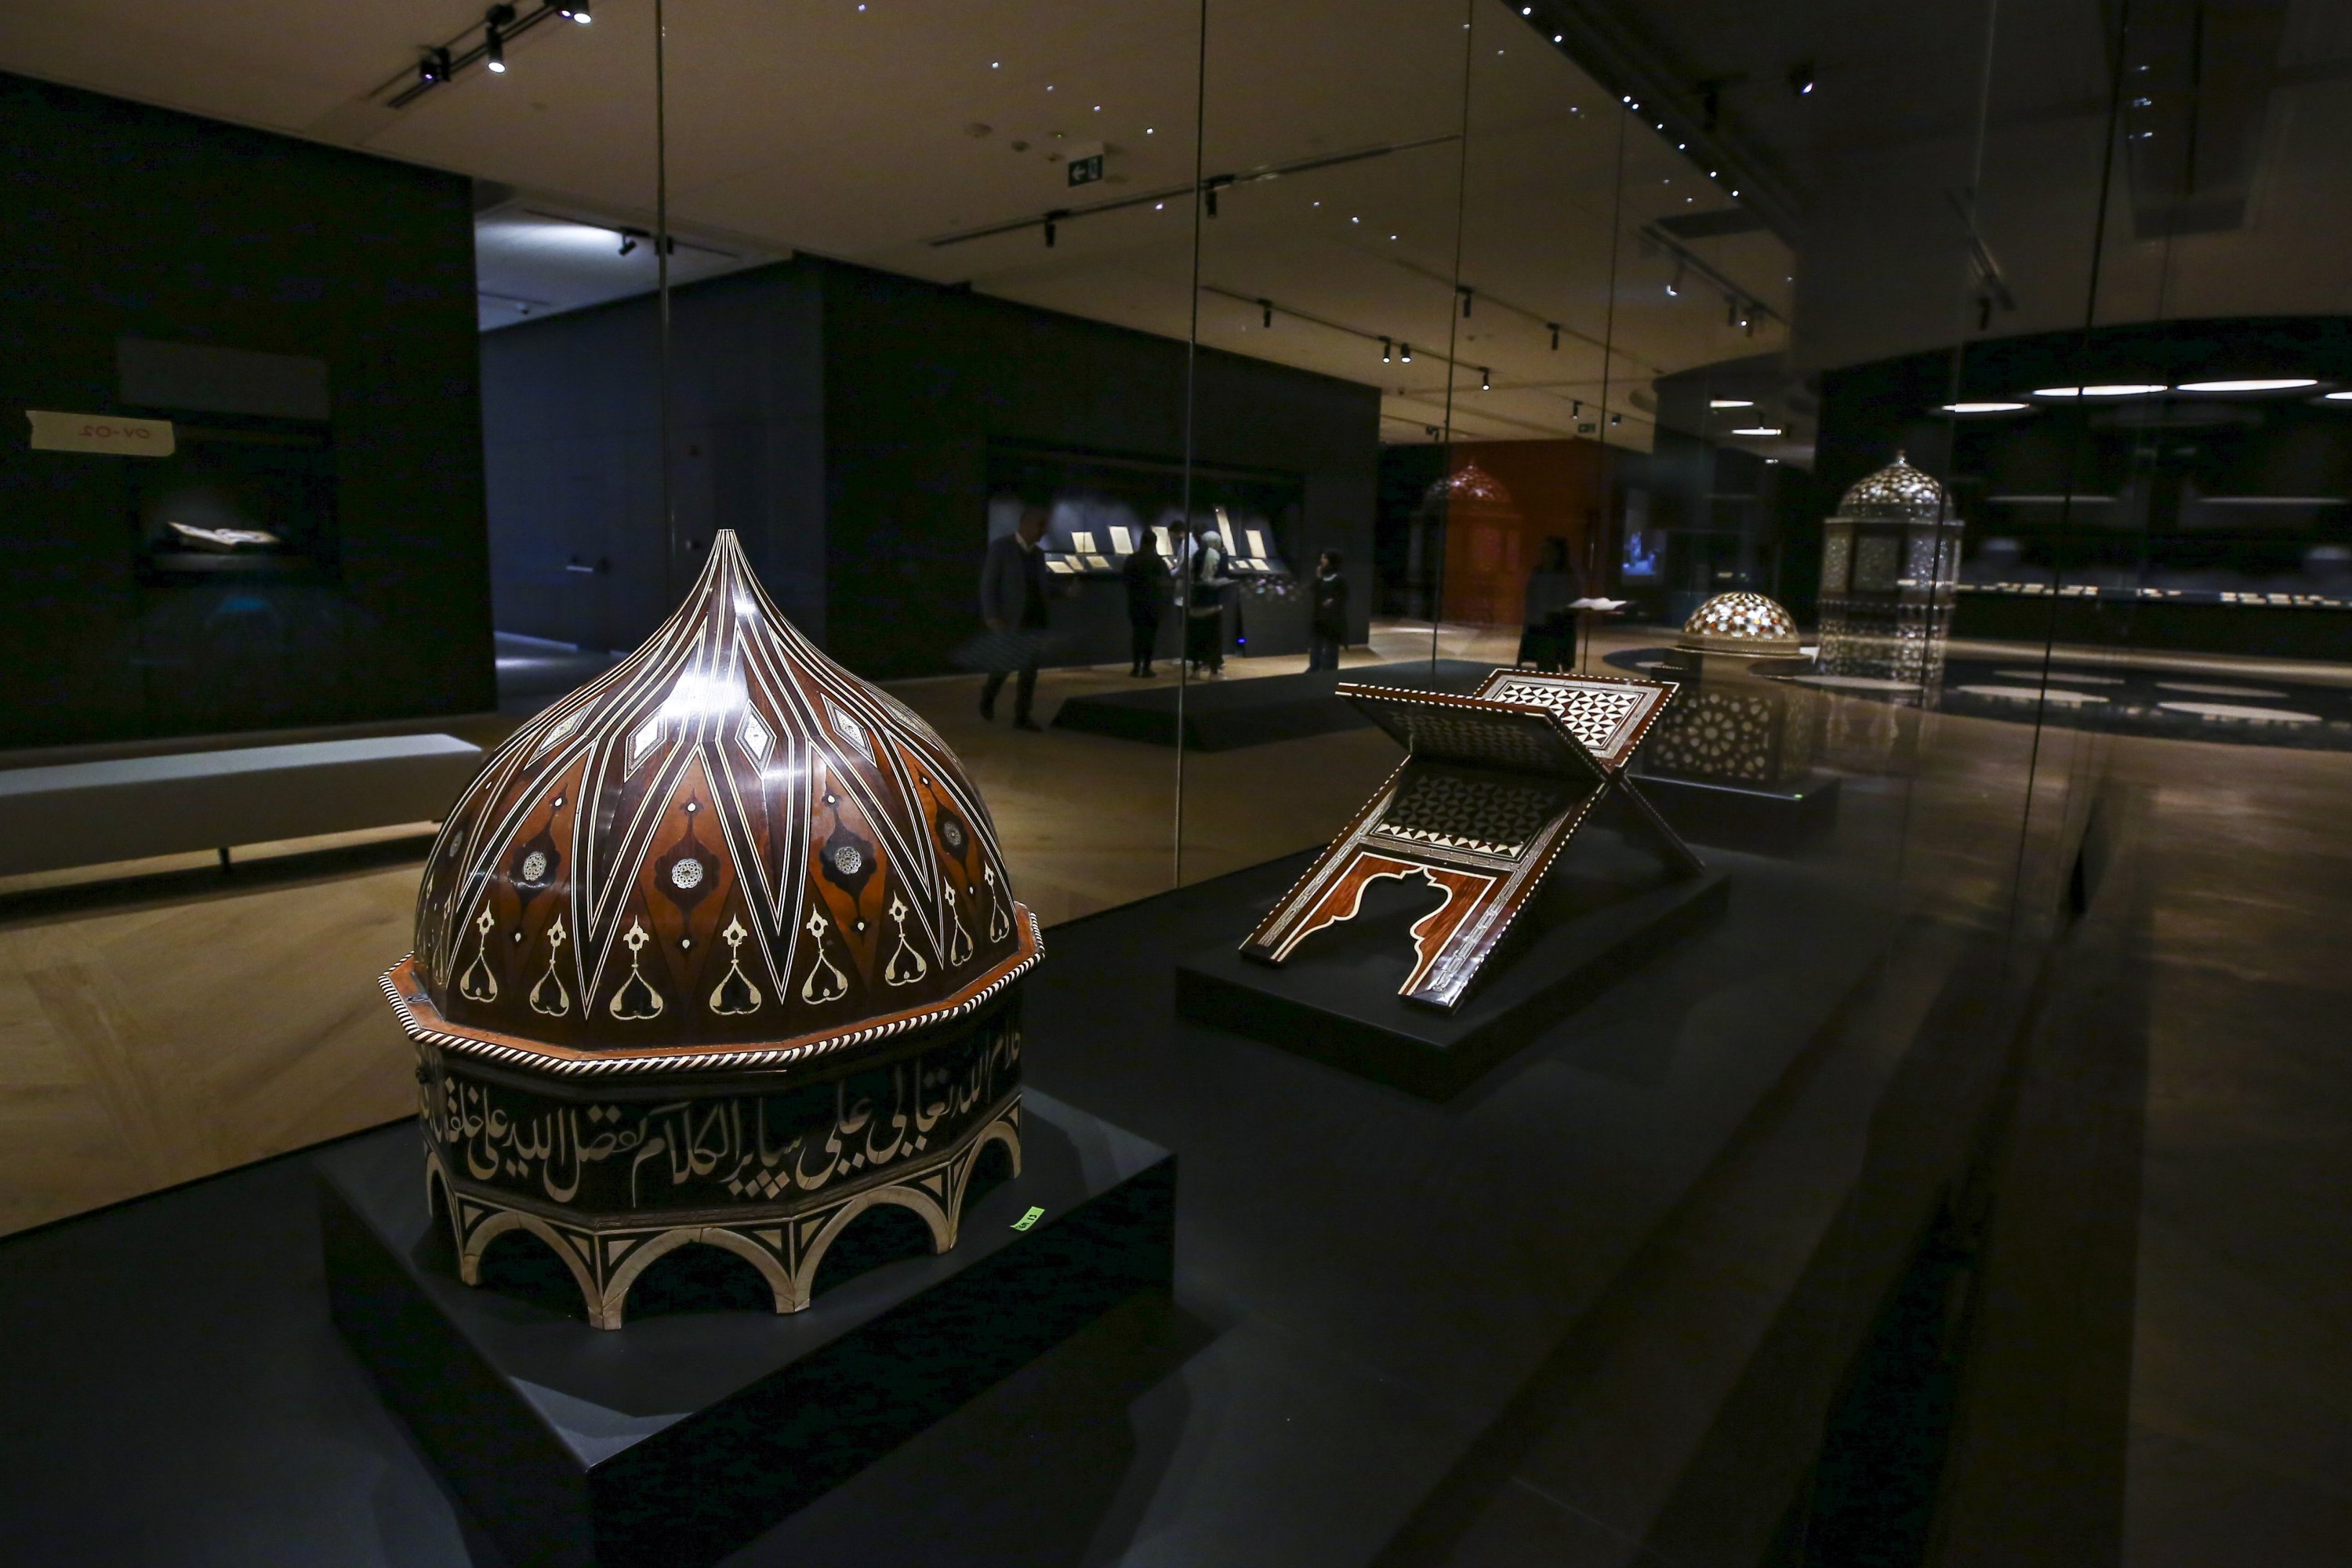 Turkish President Recep Tayyip Erdoğan inaugurated the Islamic Civilizations Museum on the grounds of the Grand Çamlıca Mosque, Istanbul, Turkey, April 8, 2022. (AA Photo)